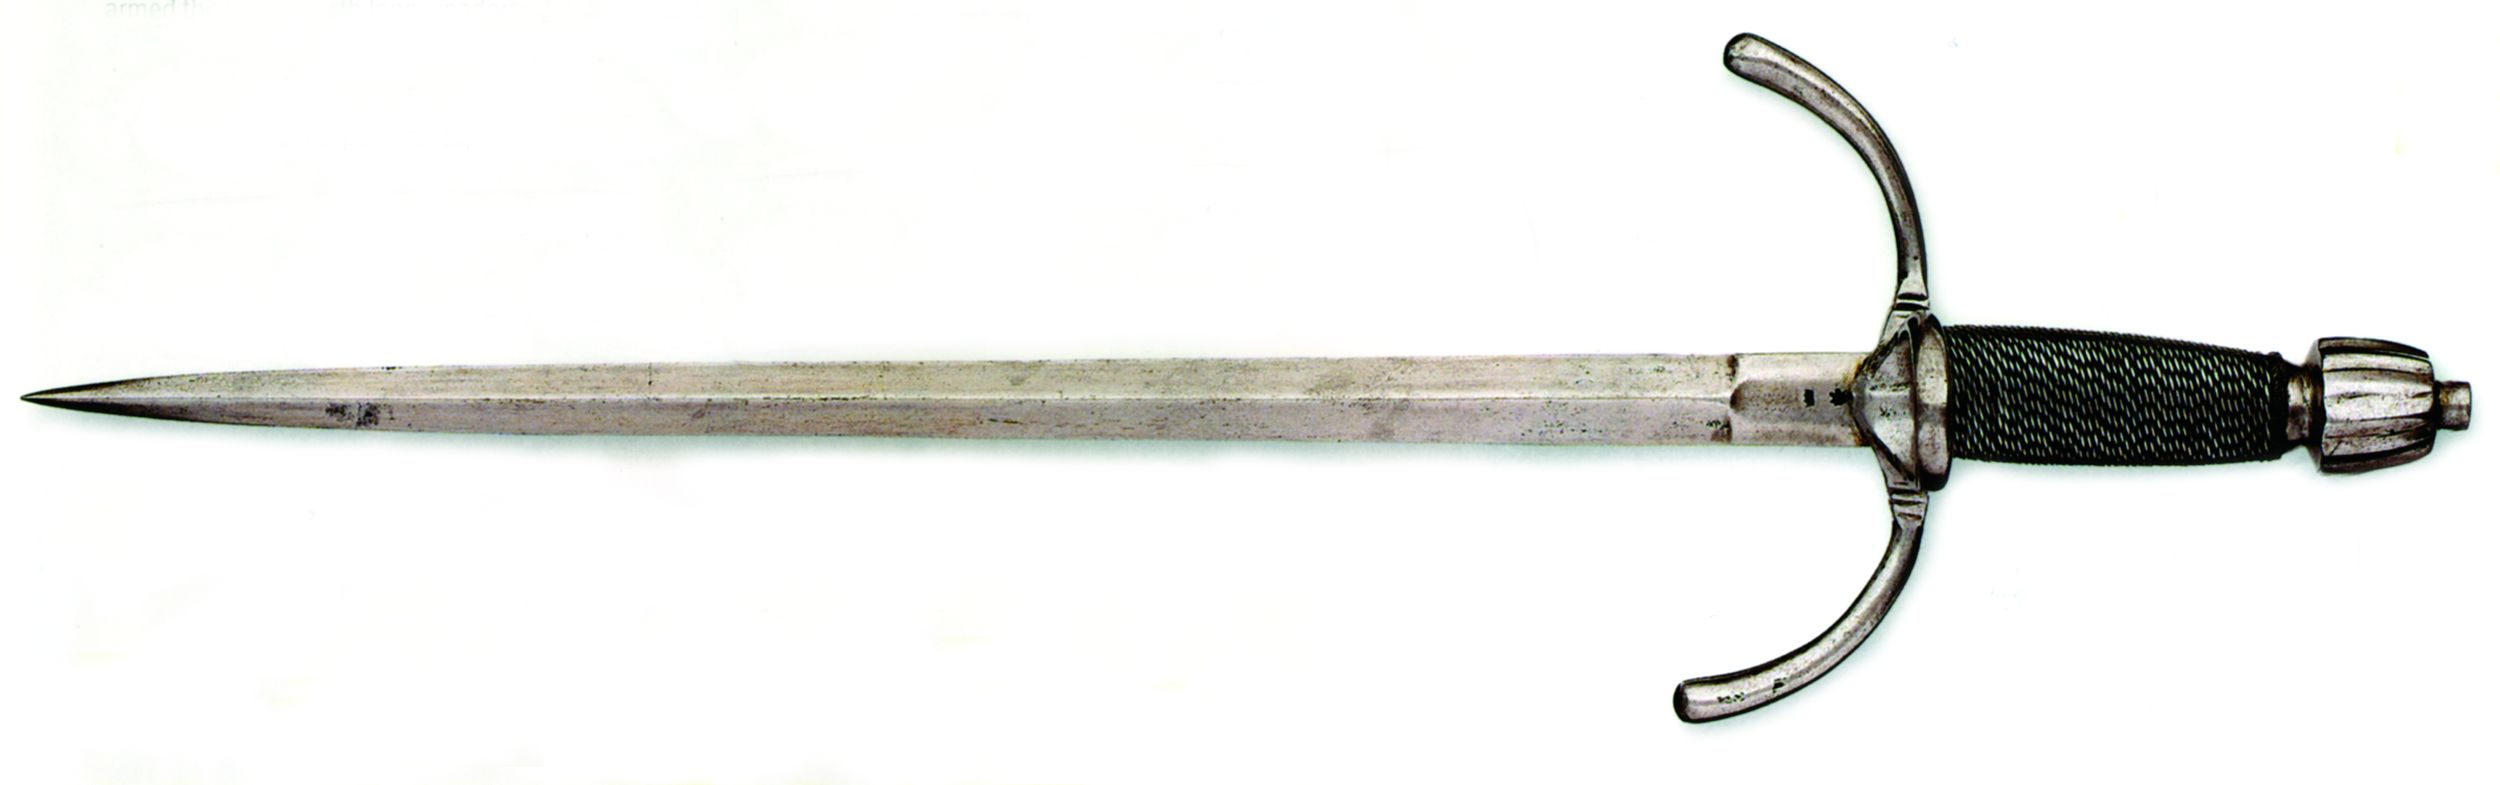 A 16th-century quillon dagger. Forward-facing quillons are typical of left-handed daggers. 